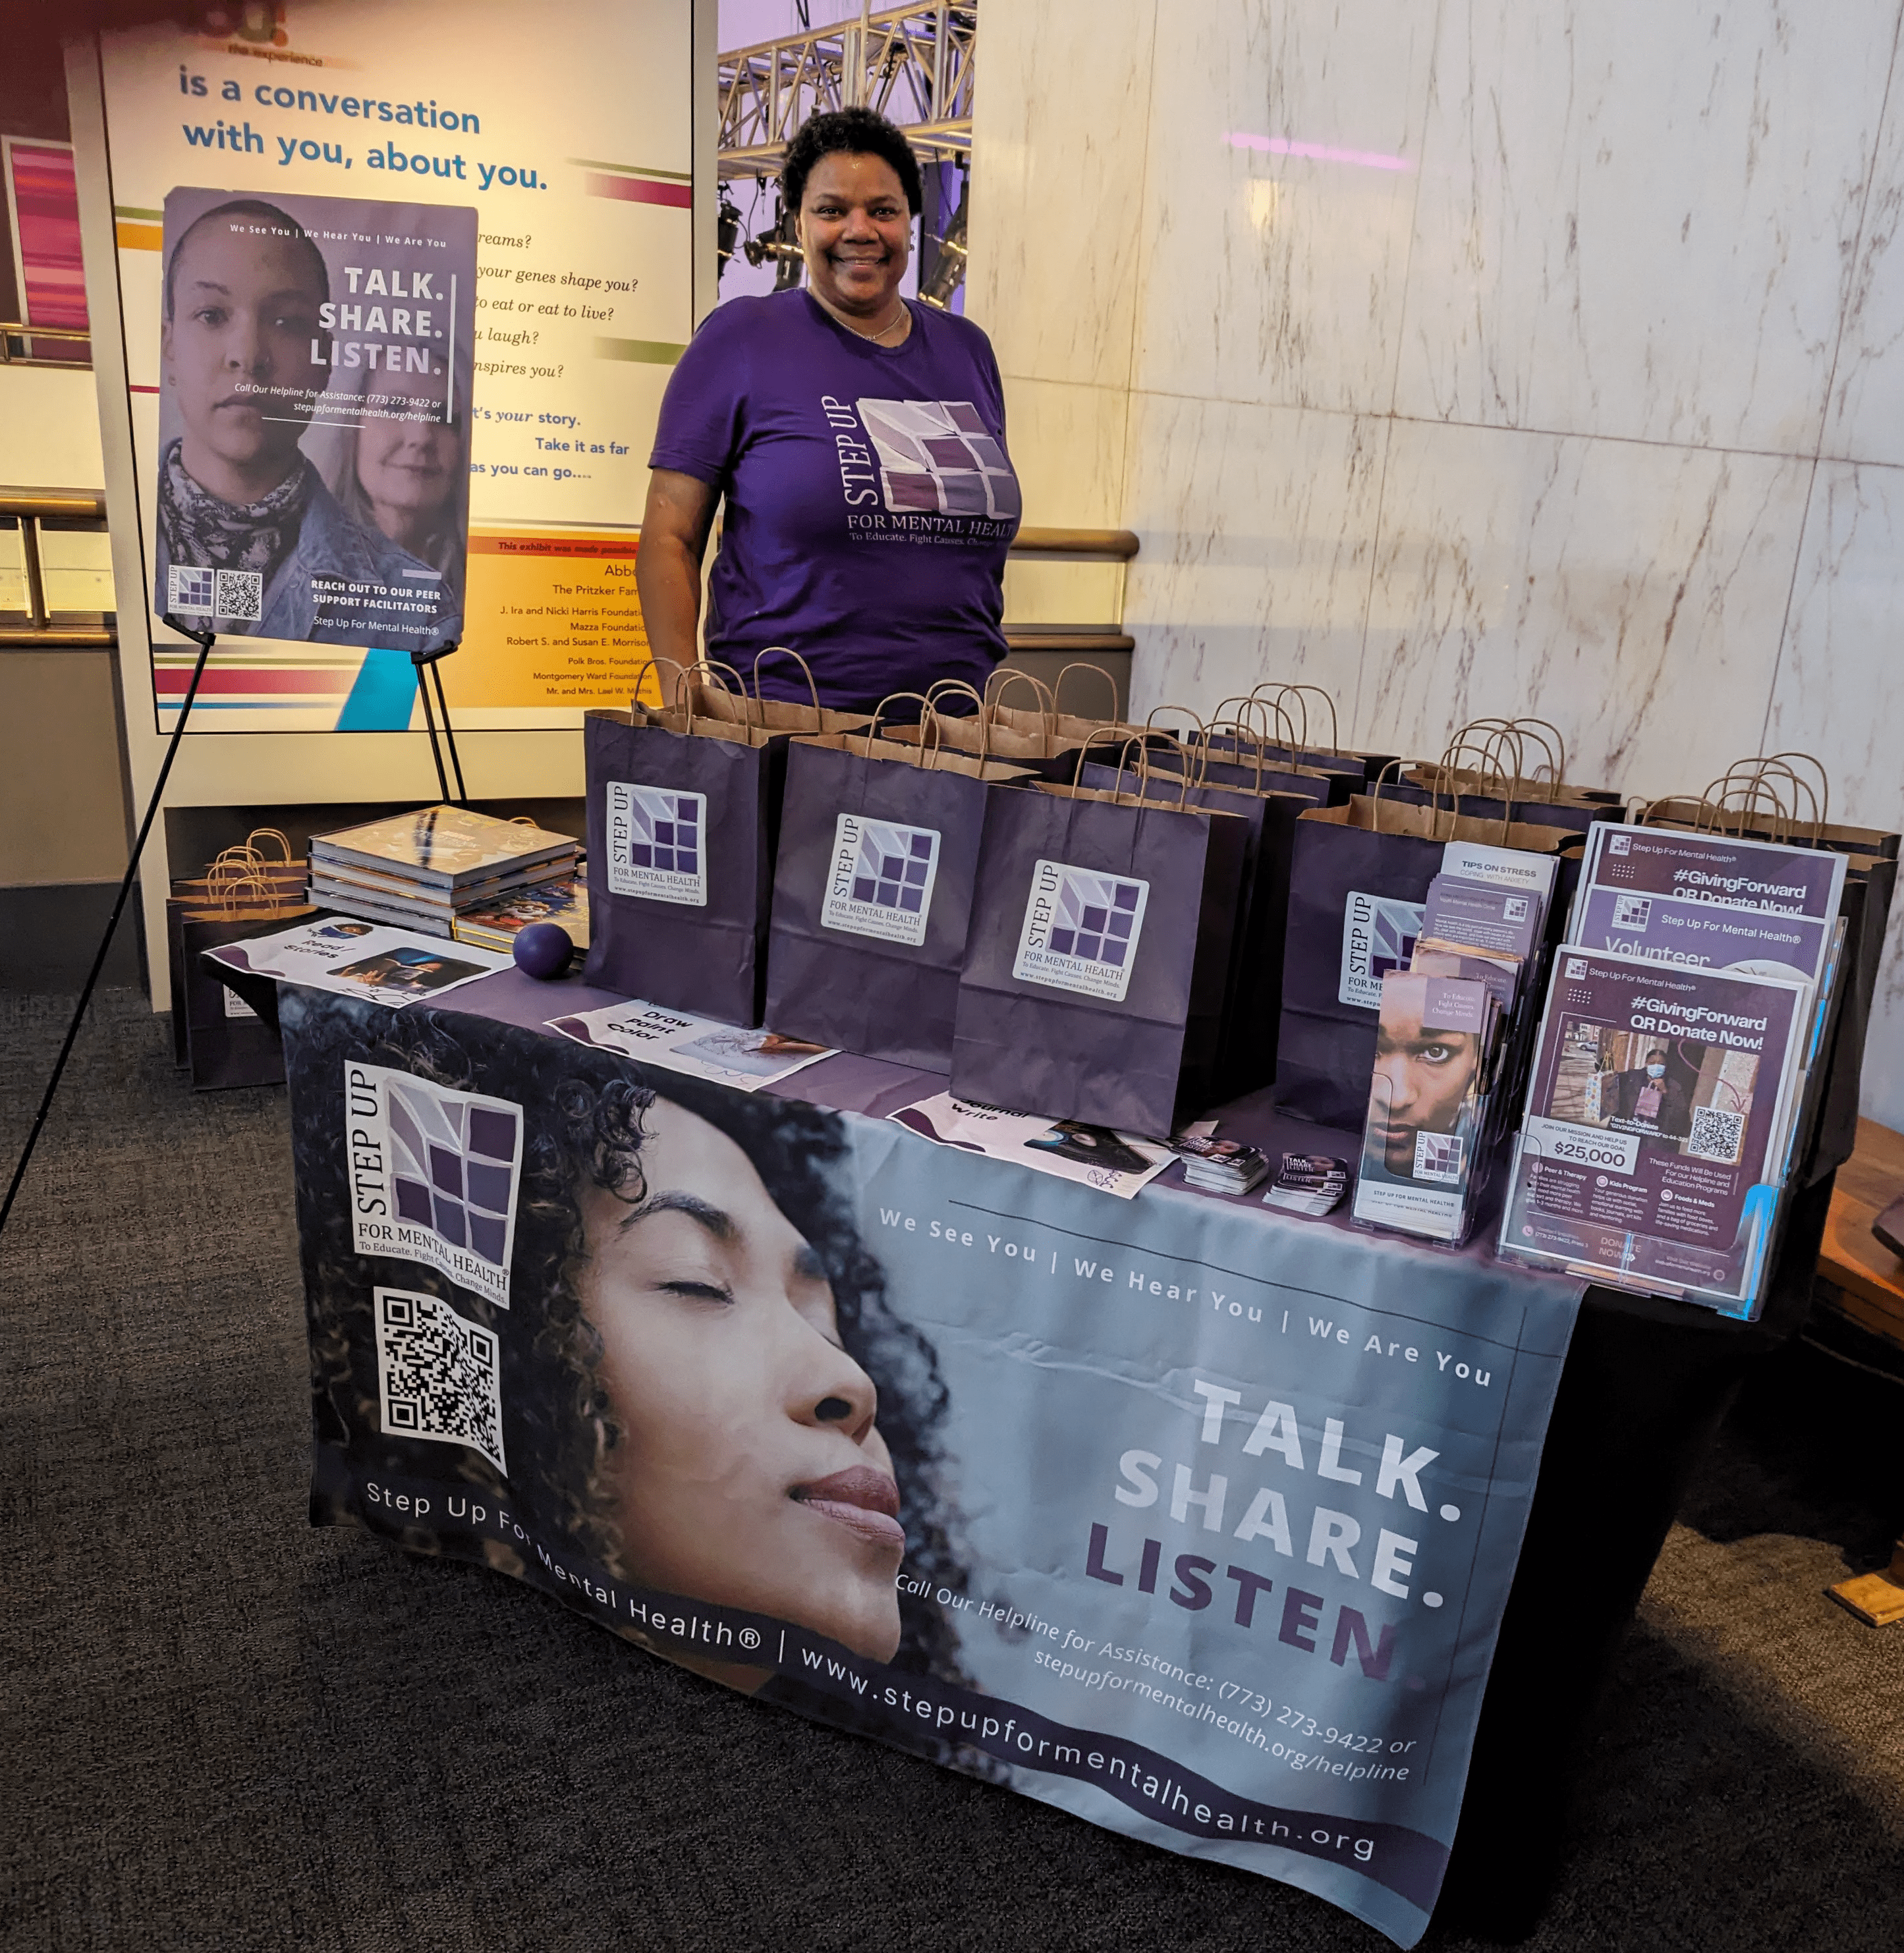 A person in a purple shirt standing at a conference booth with goodie bags that say "Step Up for Mental Health"